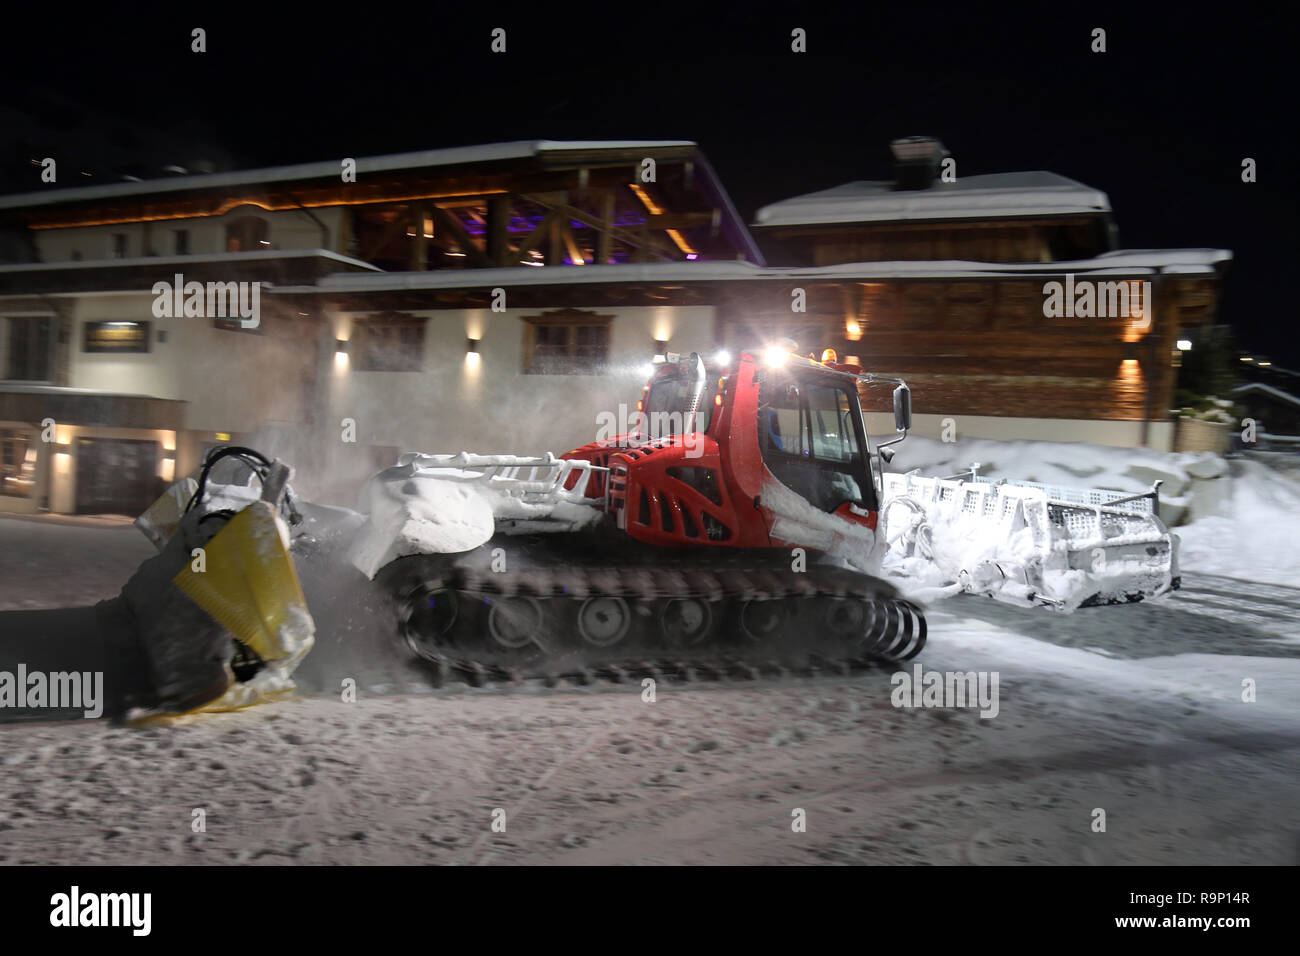 Ratrack snow grooming machine preparing slopes for skiers on ski resort in mountains on night. Stock Photo